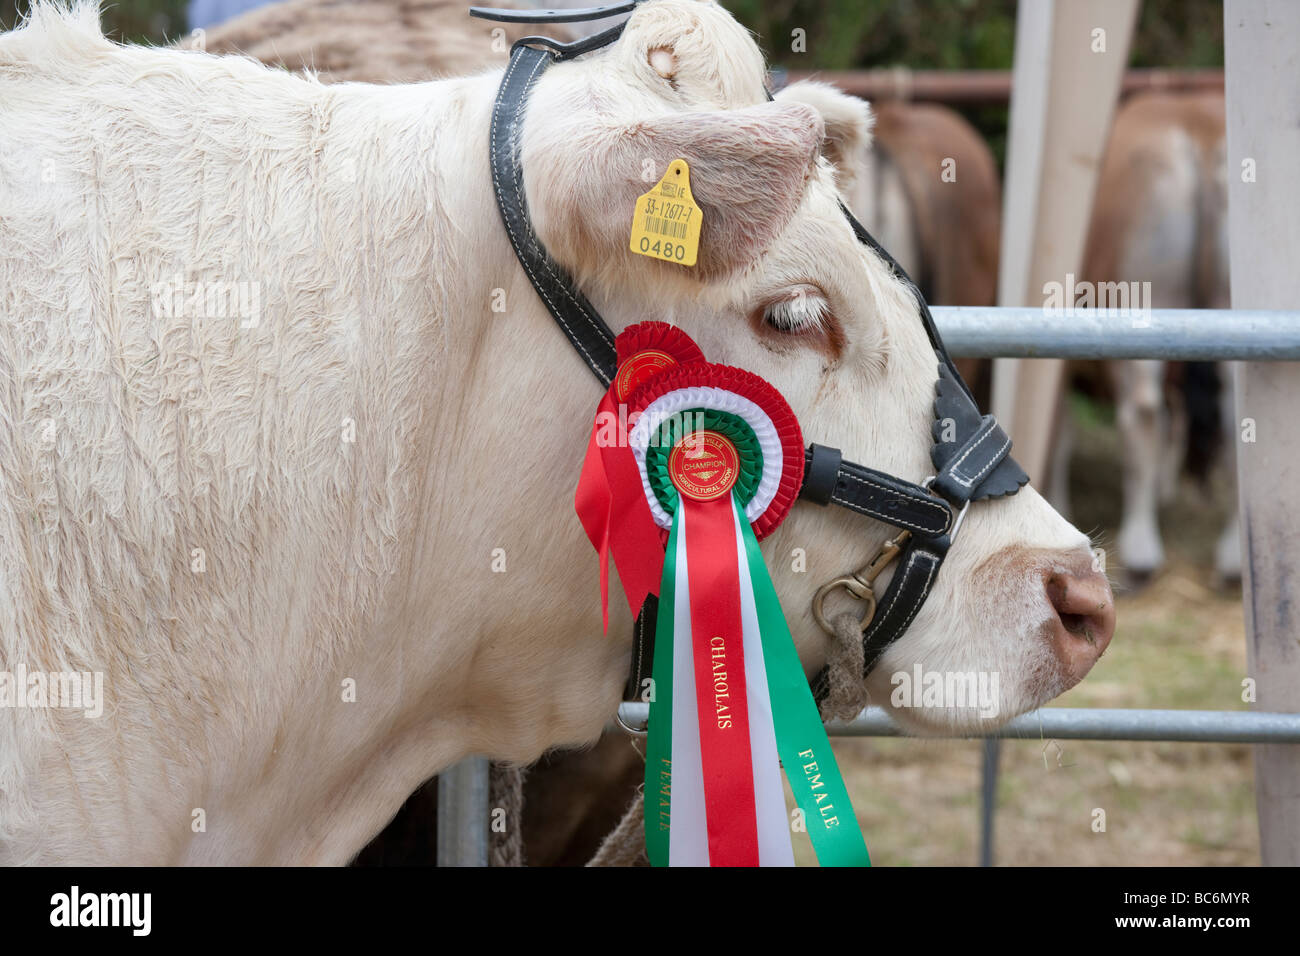 Prize winning cow at Agricultural show, Ireland Stock Photo